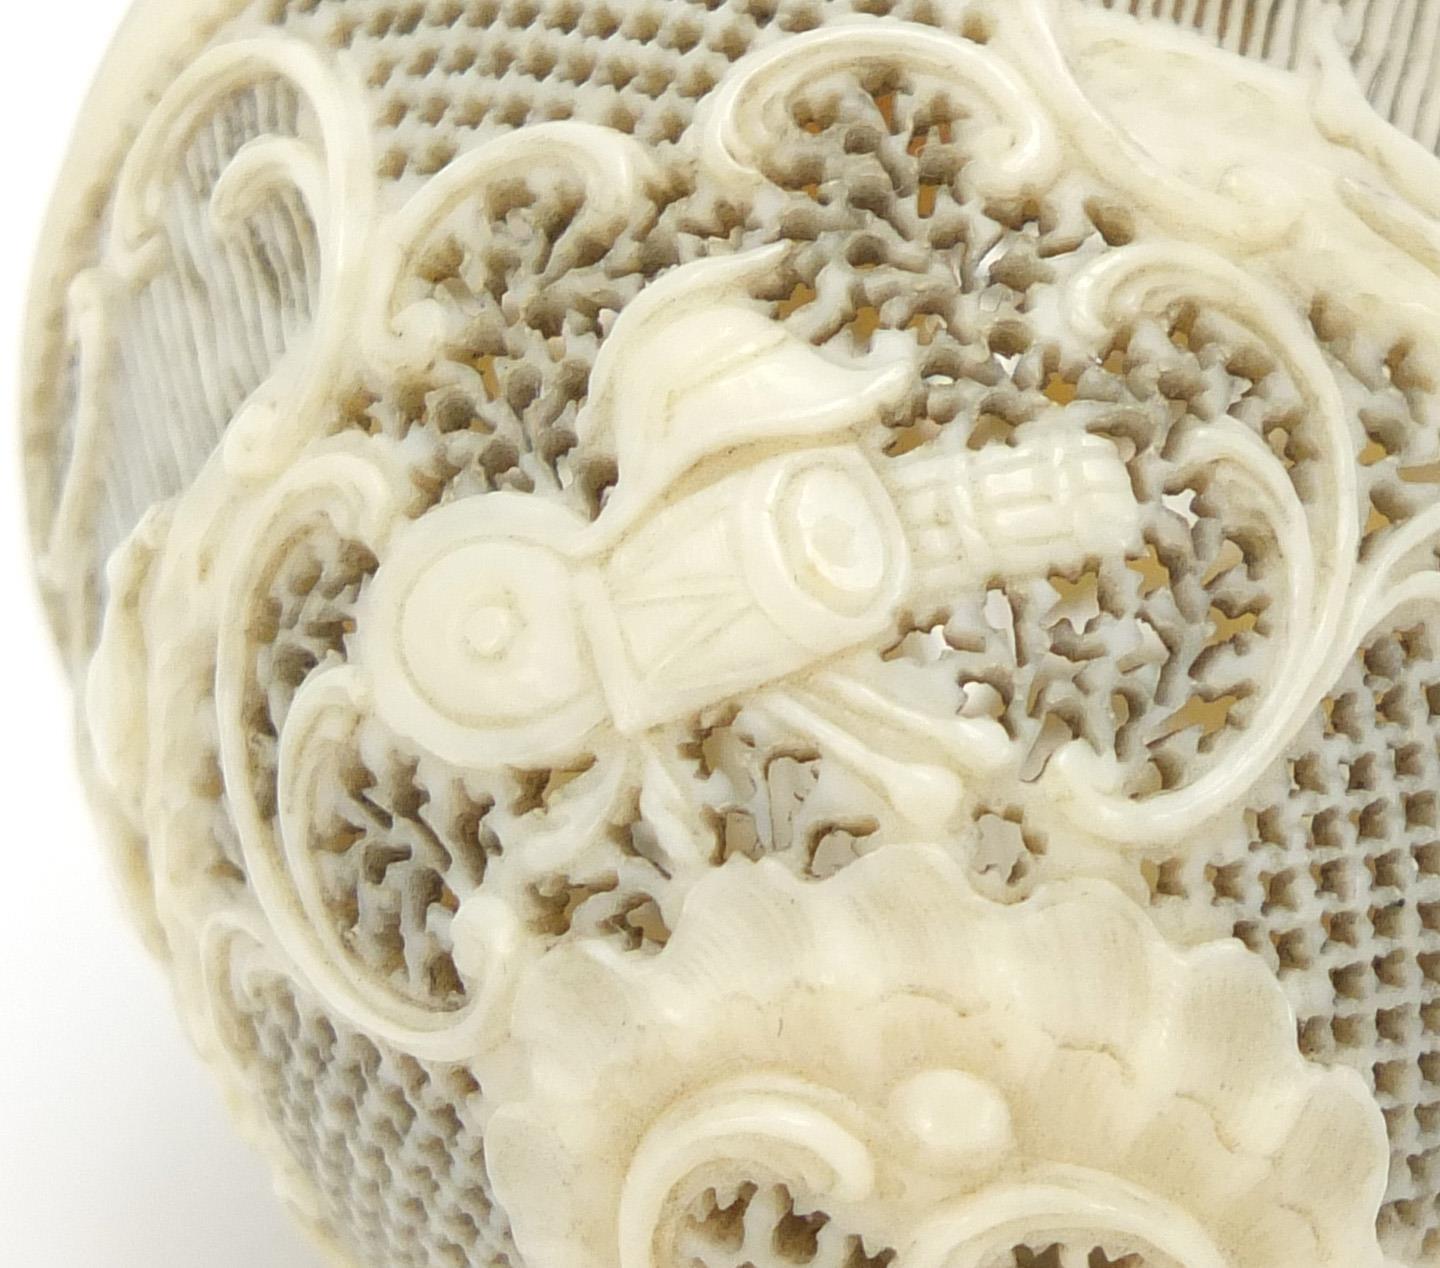 19th century European ivory trinket, finely pierced and carved with Cupids and flowers amongst C - Image 8 of 8